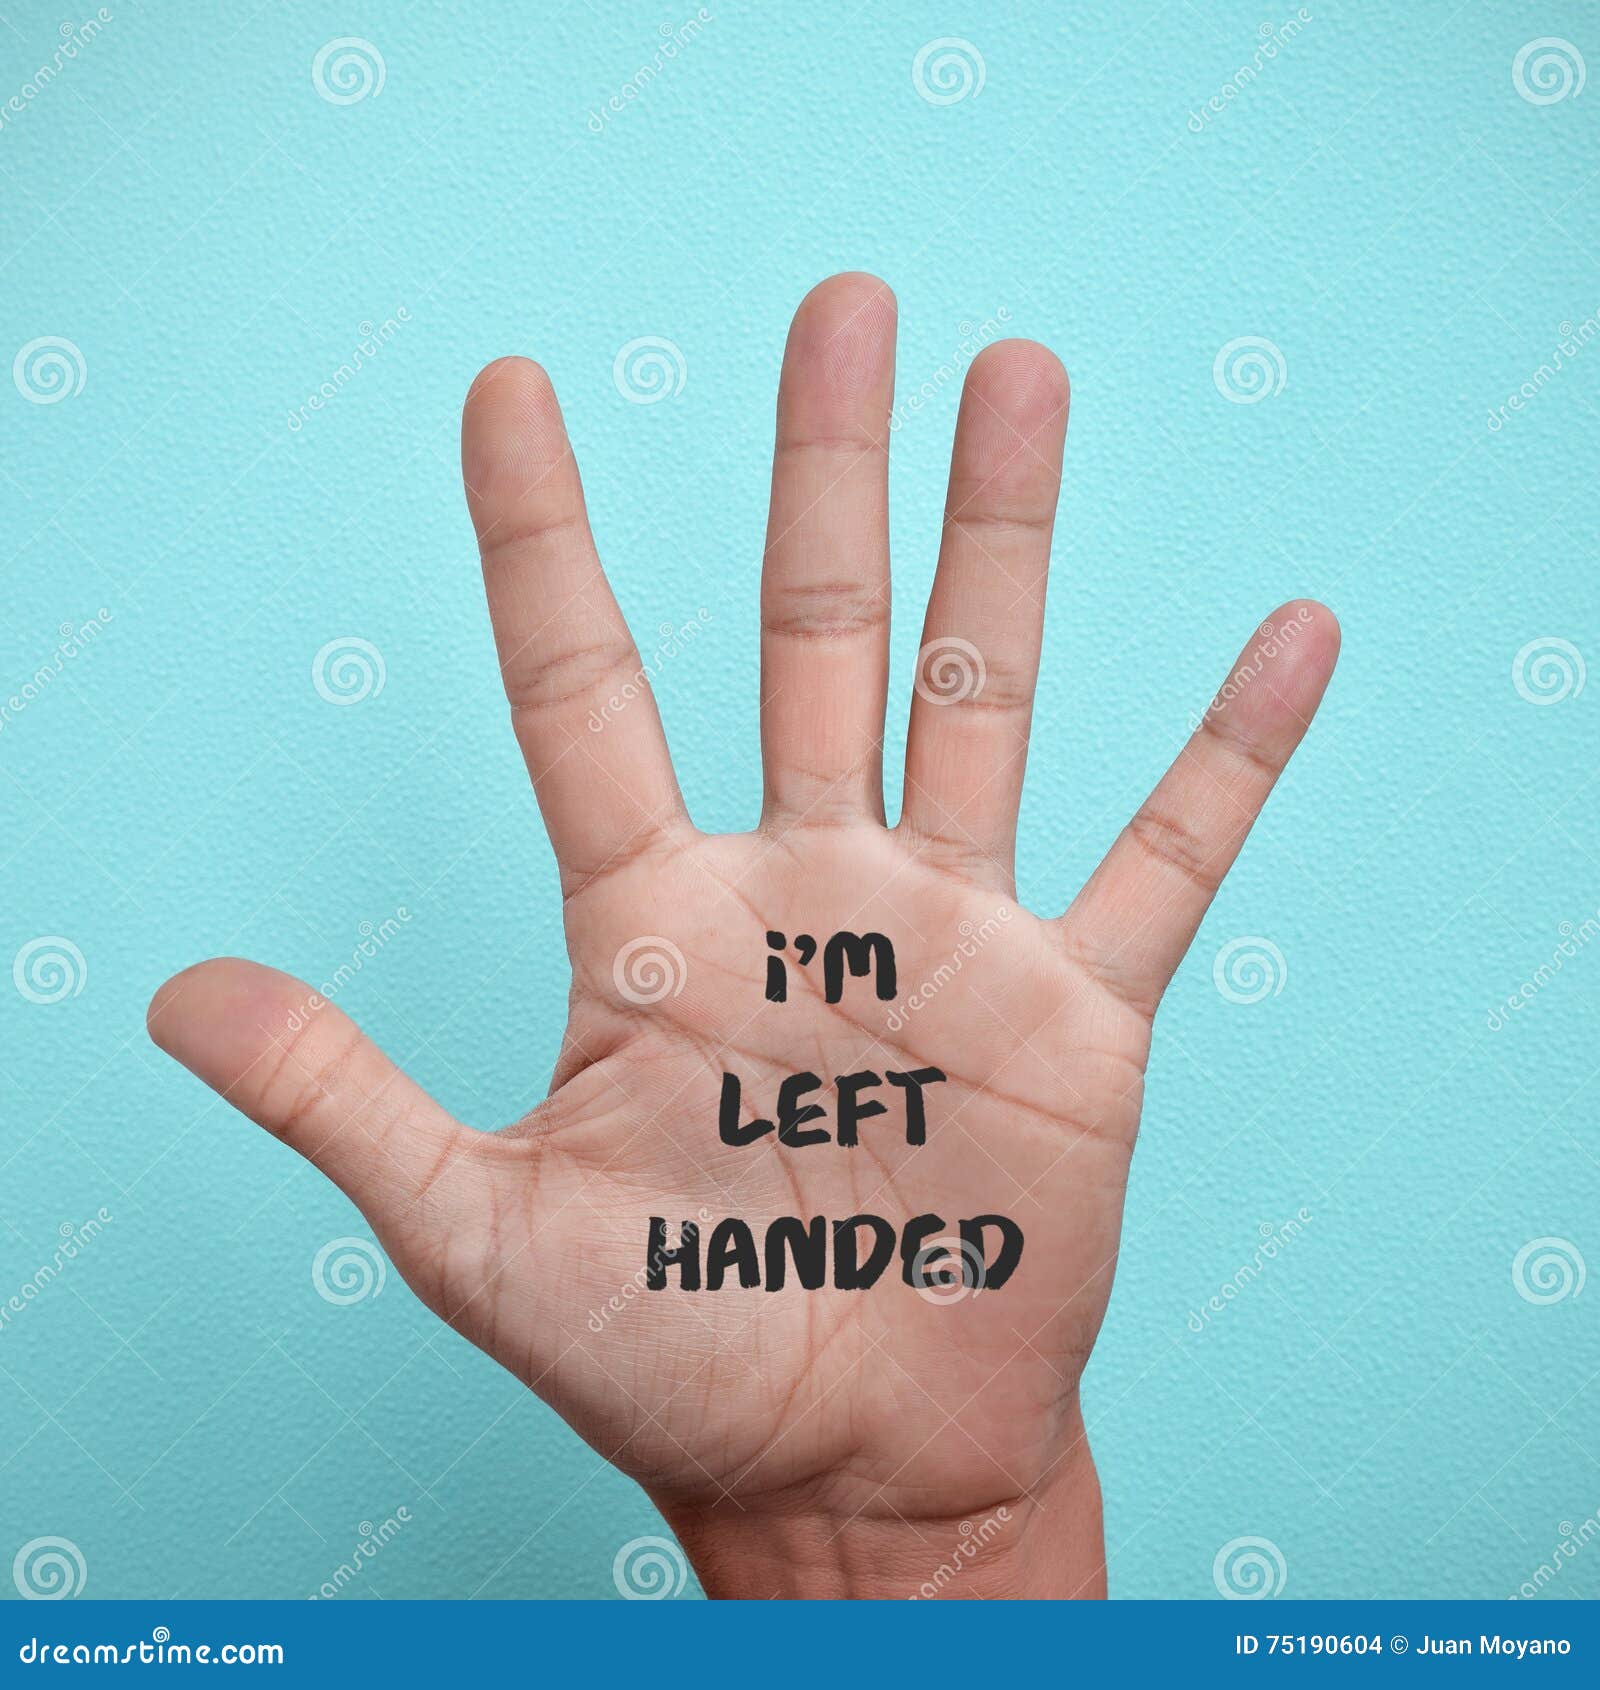 text i am left-handed in the palm of the hand